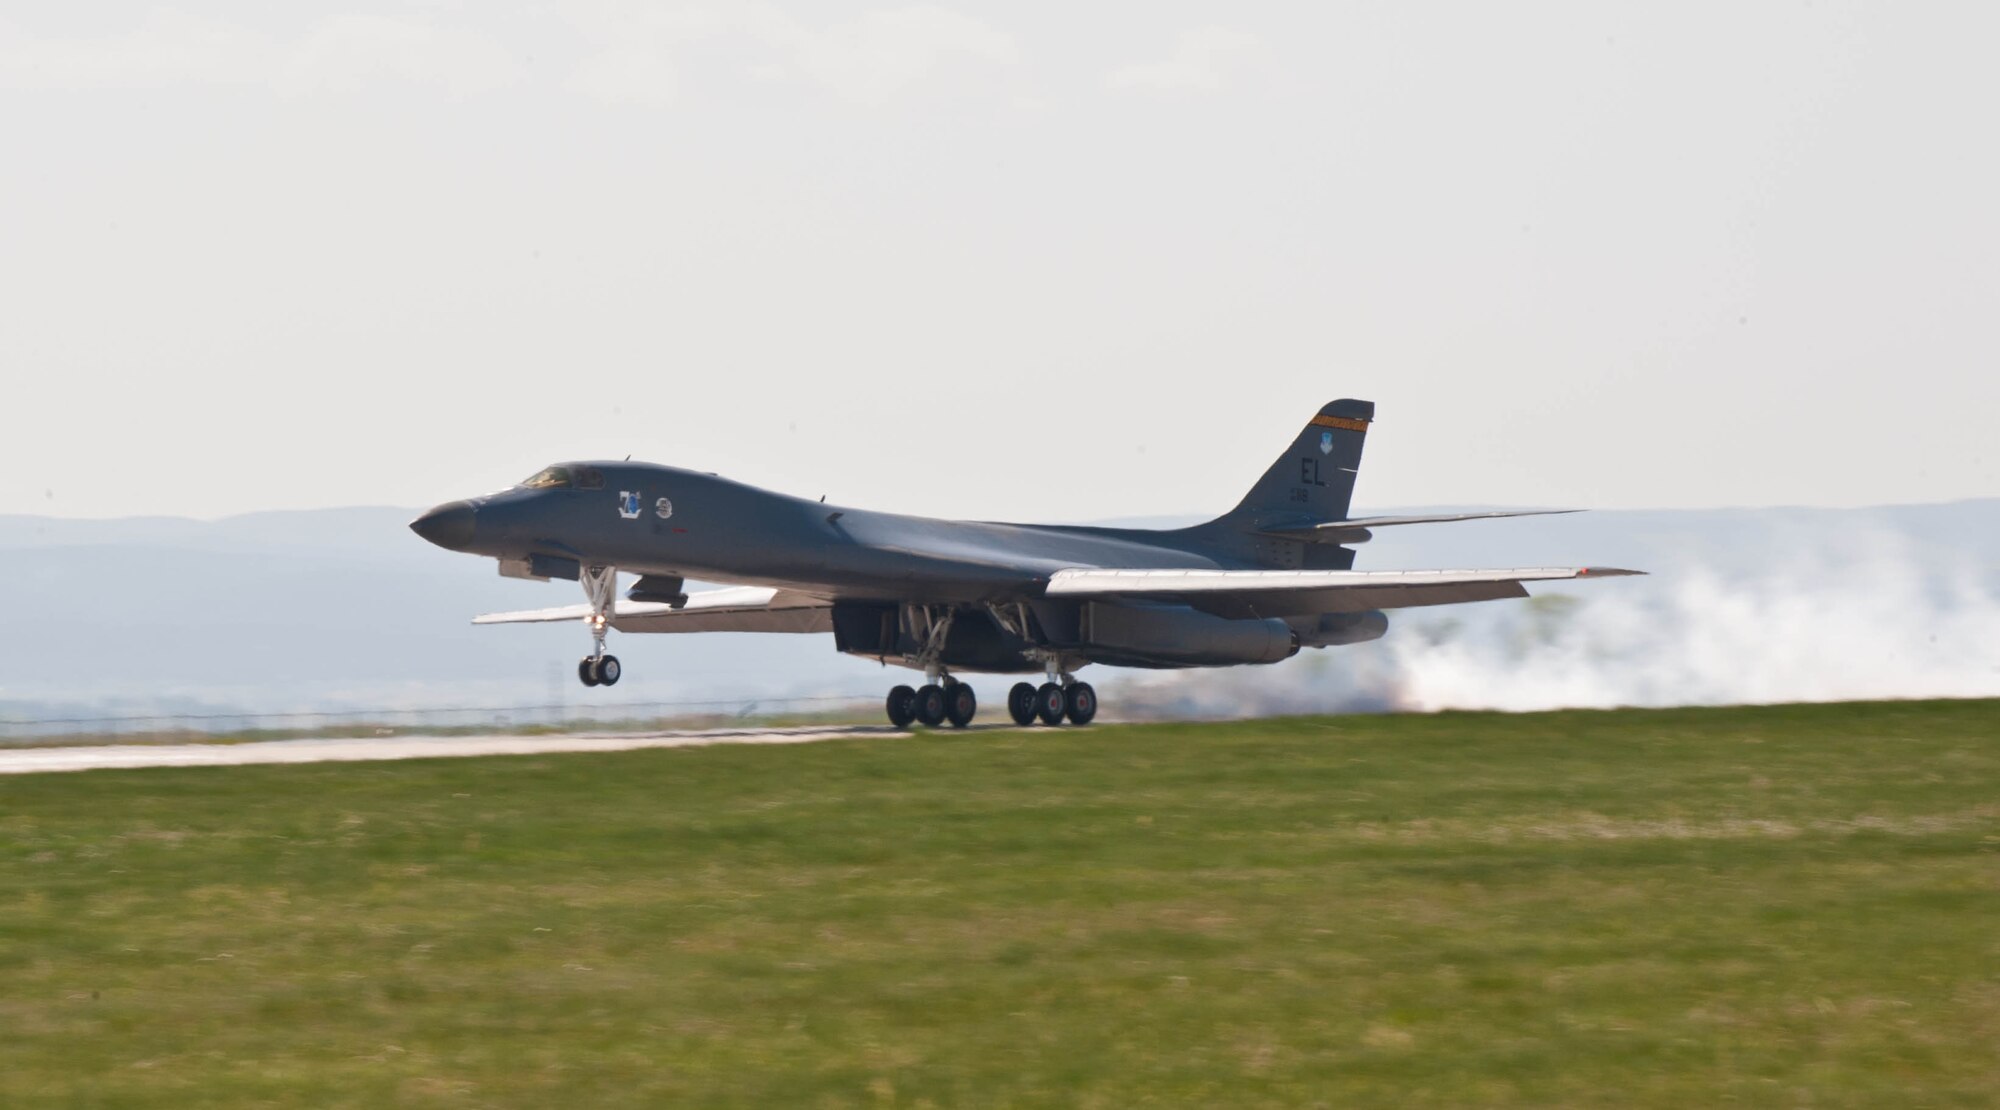 A base B-1 bomber touches down at Ellsworth Air Force Base, S.D., May 15, 2012 after completing a successful mission as part of a Combat Hammer exercise over the Utah Test and Training Range. For the first time in history base B-1s employed GBU-54 Laser Joint Direct Attack Munitions against moving targets during the Air Force’s air to ground Weapon System Evaluation Program known as Combat Hammer. (U.S. Air Force photo by Airman 1st Class Zachary Hada/Released)